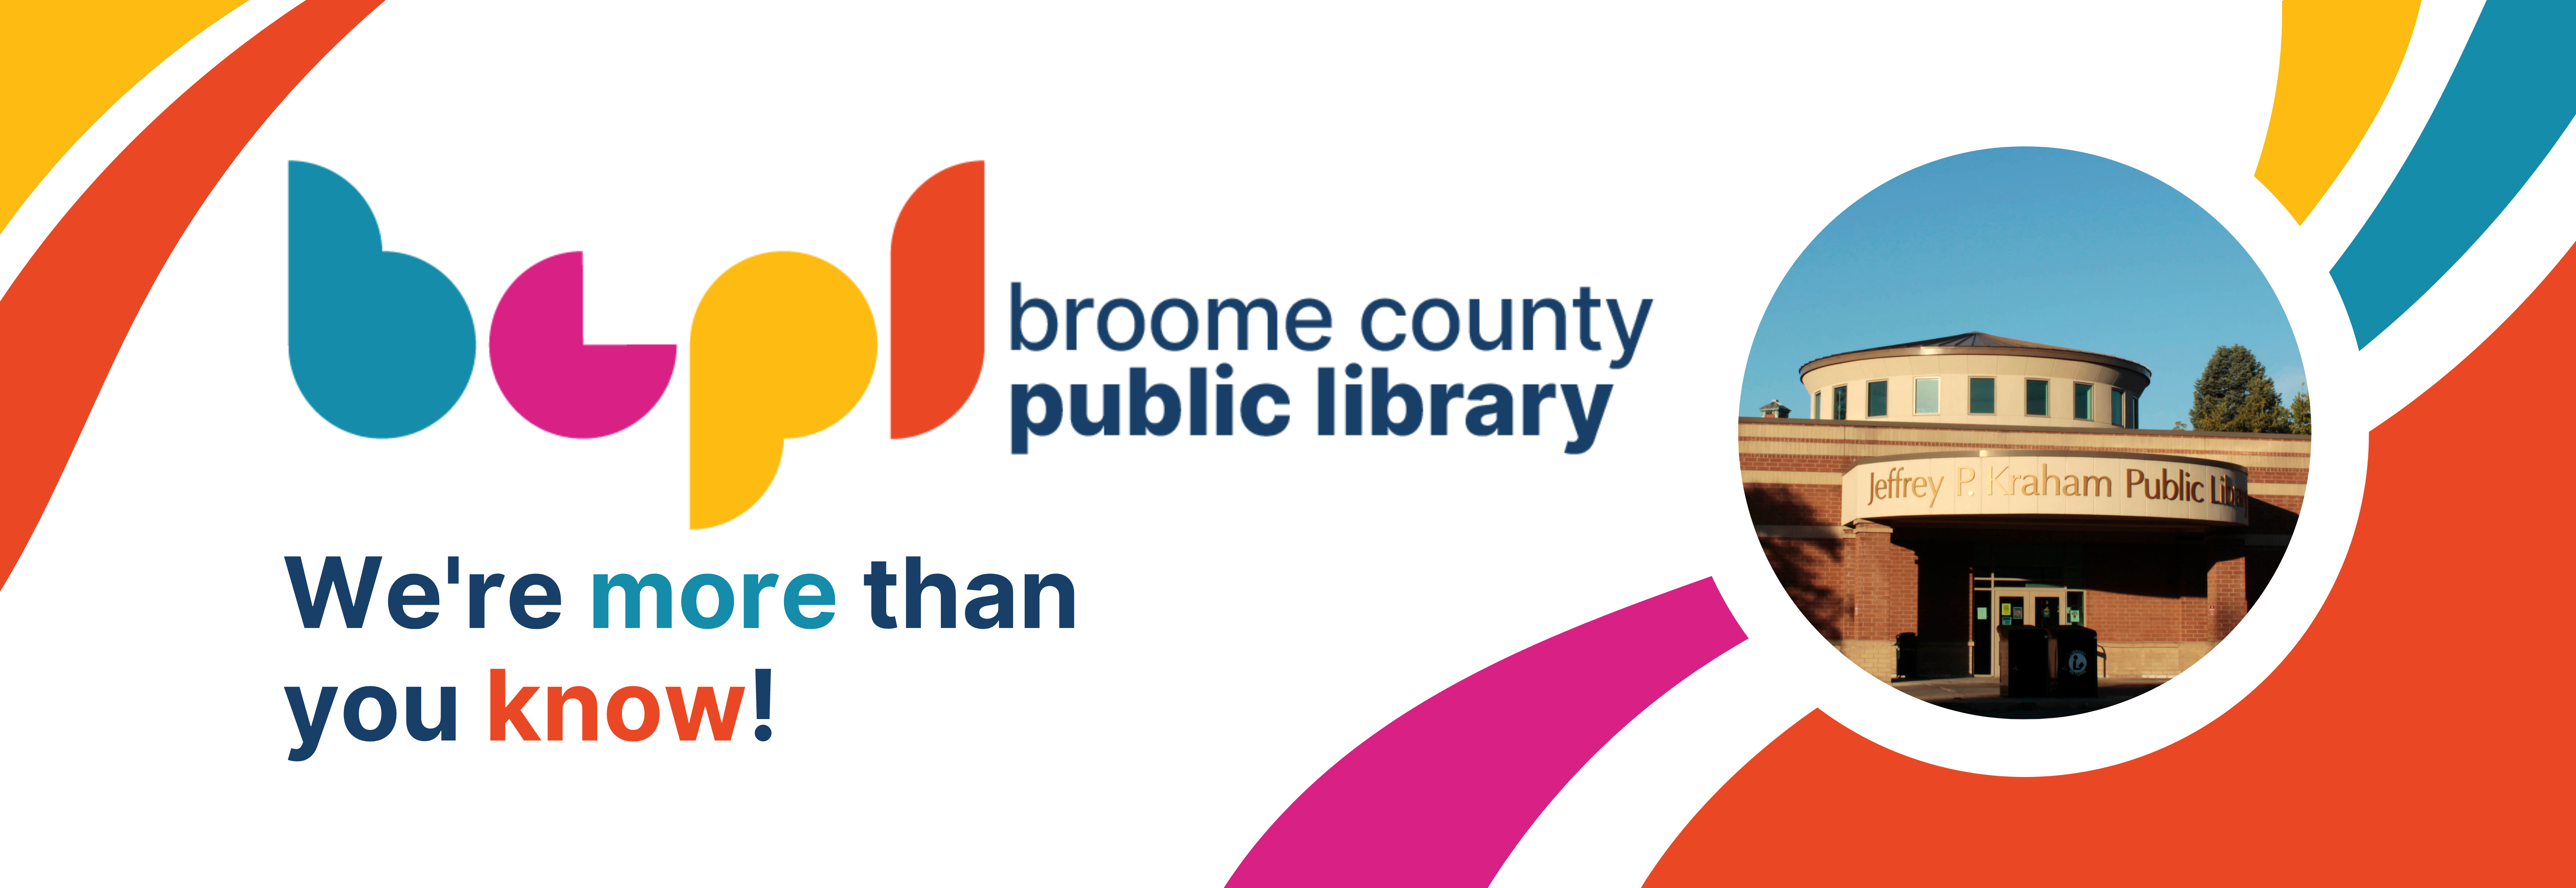 a banner that says "Broome County Public Library, We're more than you know" with a picture of the library